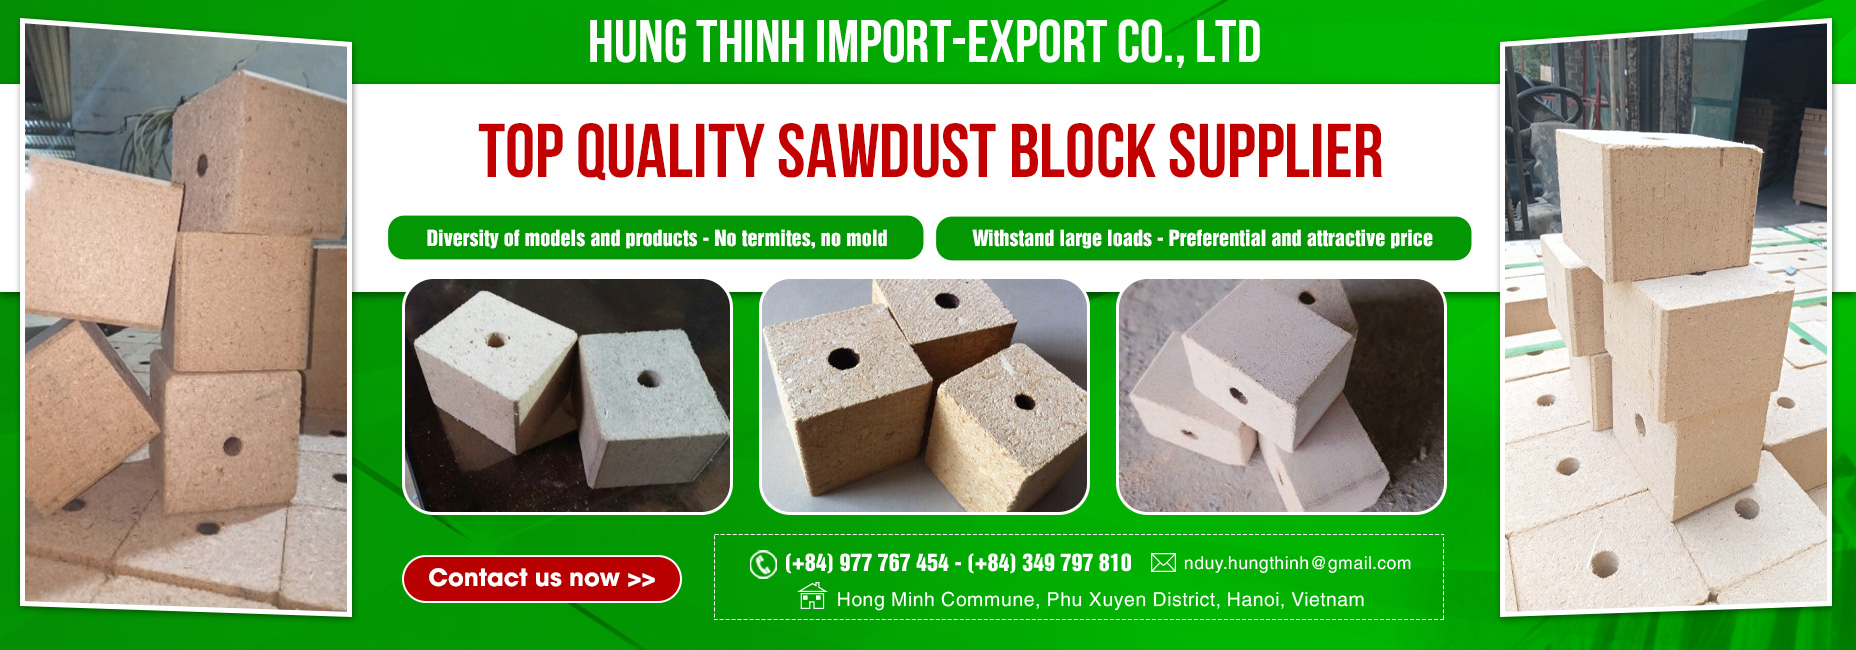 HUNG THINH IMPORT EXPORT CO., LTD